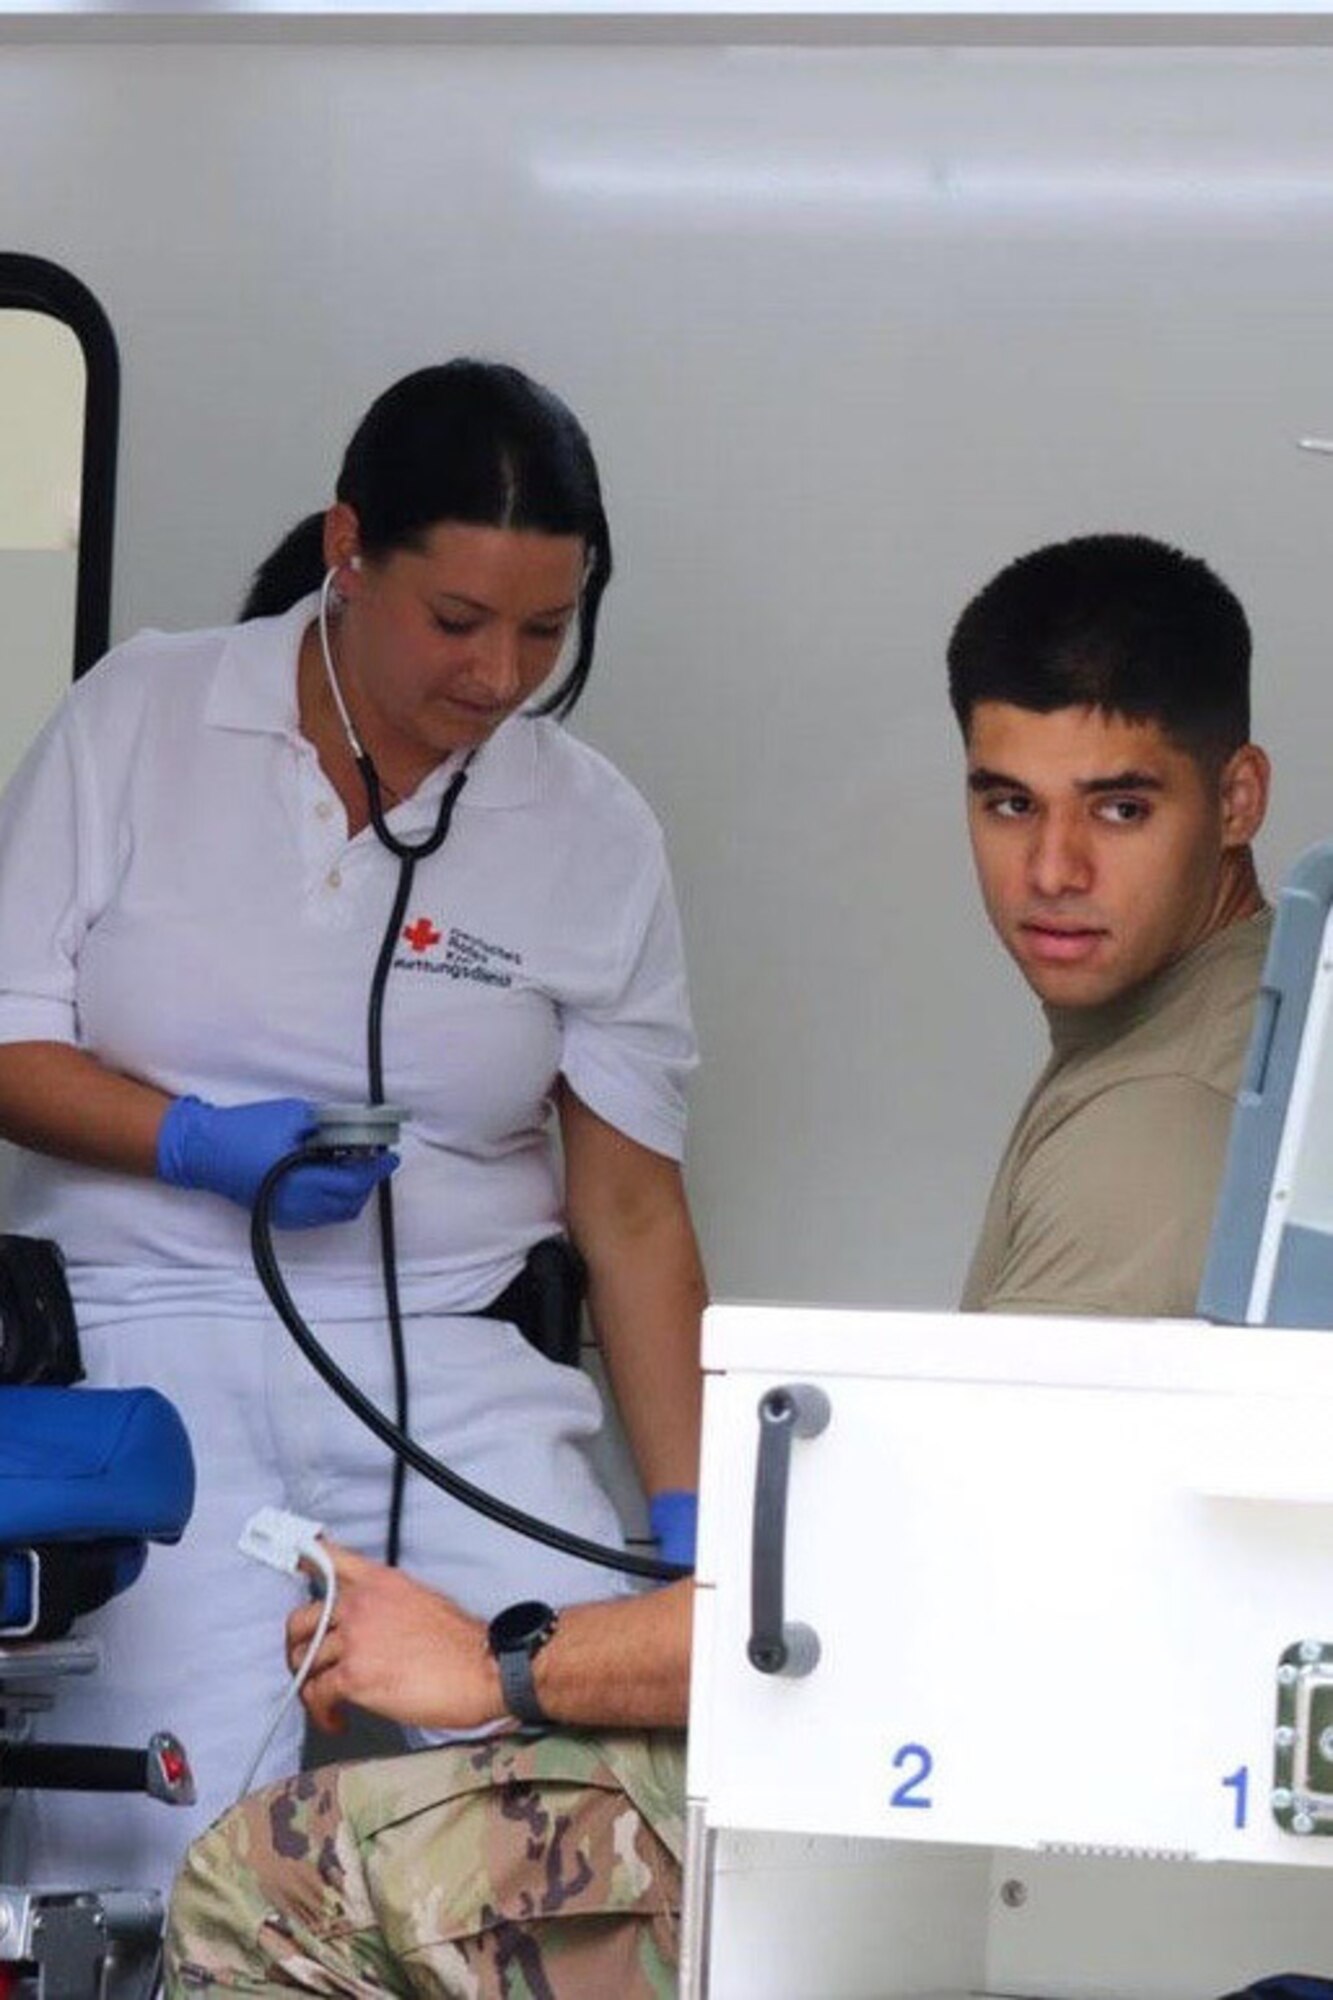 U.S. Air Force Airman 1st Class Raul Vargas, 786th Civil Engineer Squadron Emergency Management Logistics apprentice, is medically monitored to receive clearance to enter the scene as a responder on Team 1 at Landstuhl Regional Medical Center, Germany, June 16, 2020.